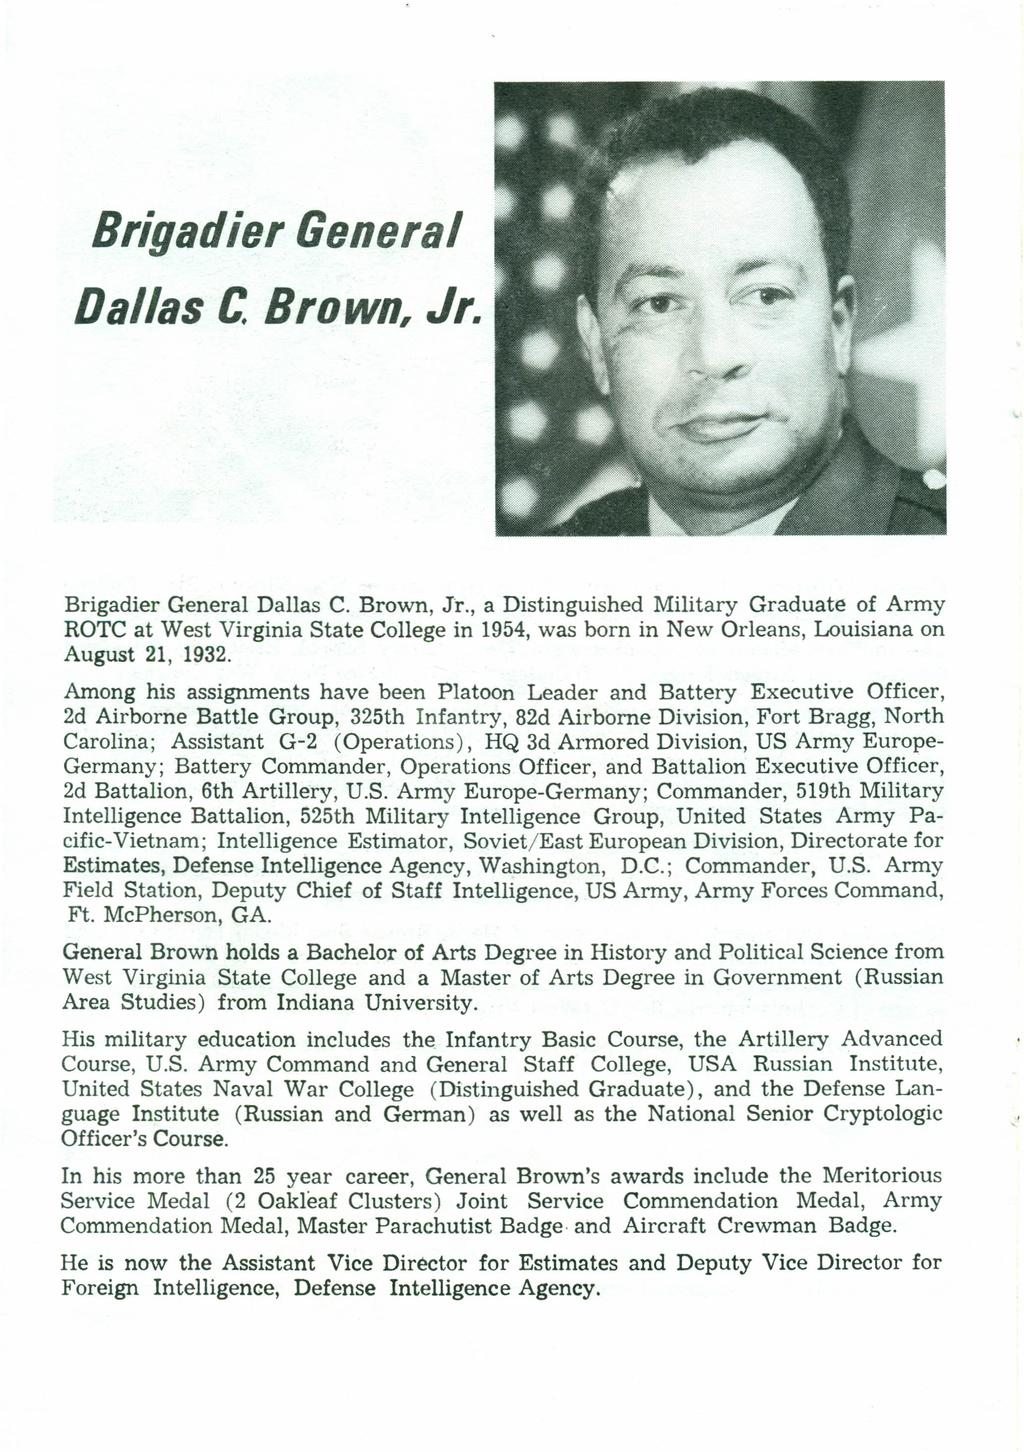 Brigadier General Dallas C. Brown, Jr. Brigadier General Dallas C. Brown, Jr., a Distinguished Military Graduate of Army ROTC at West Virginia State College in 1954,was born in New Orleans, Louisiana on August 21, 1932.